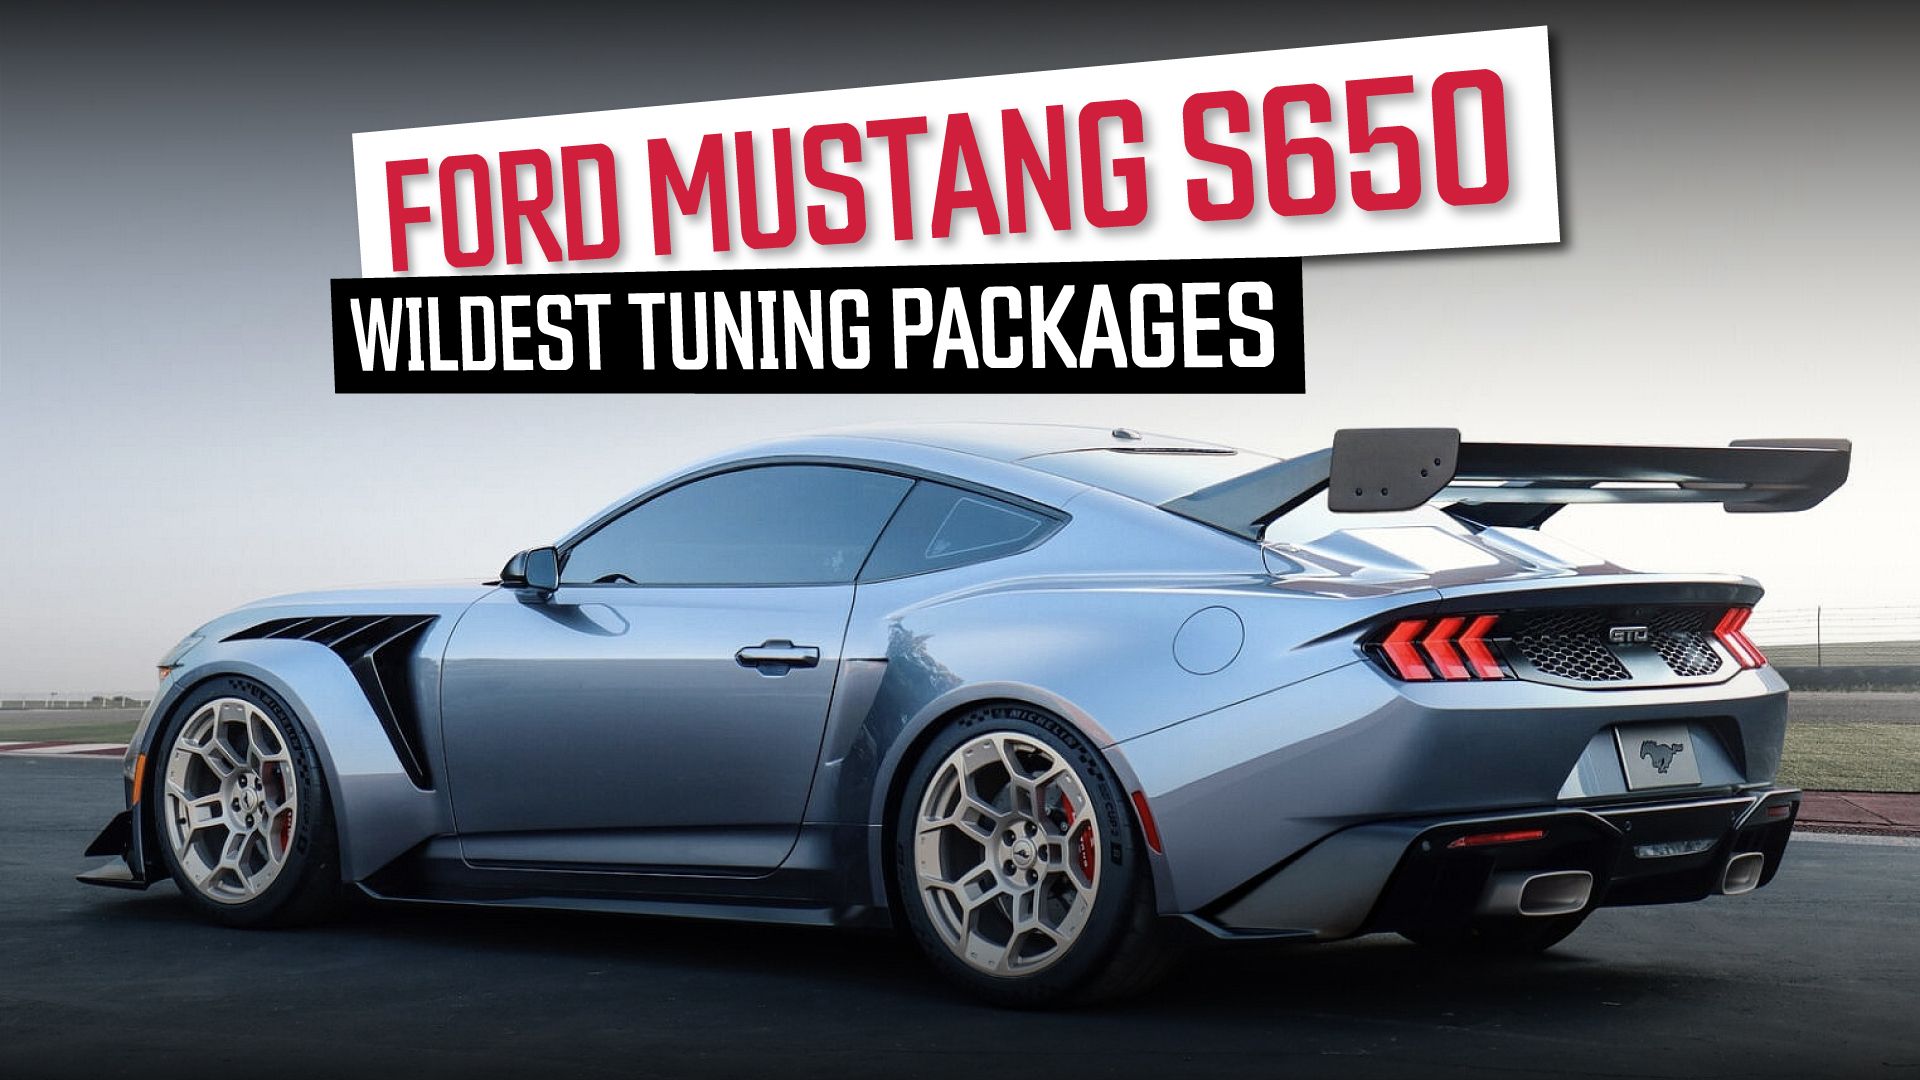 Wildest-Tuning-Packages-Available-For-The-S650-Ford-Mustang